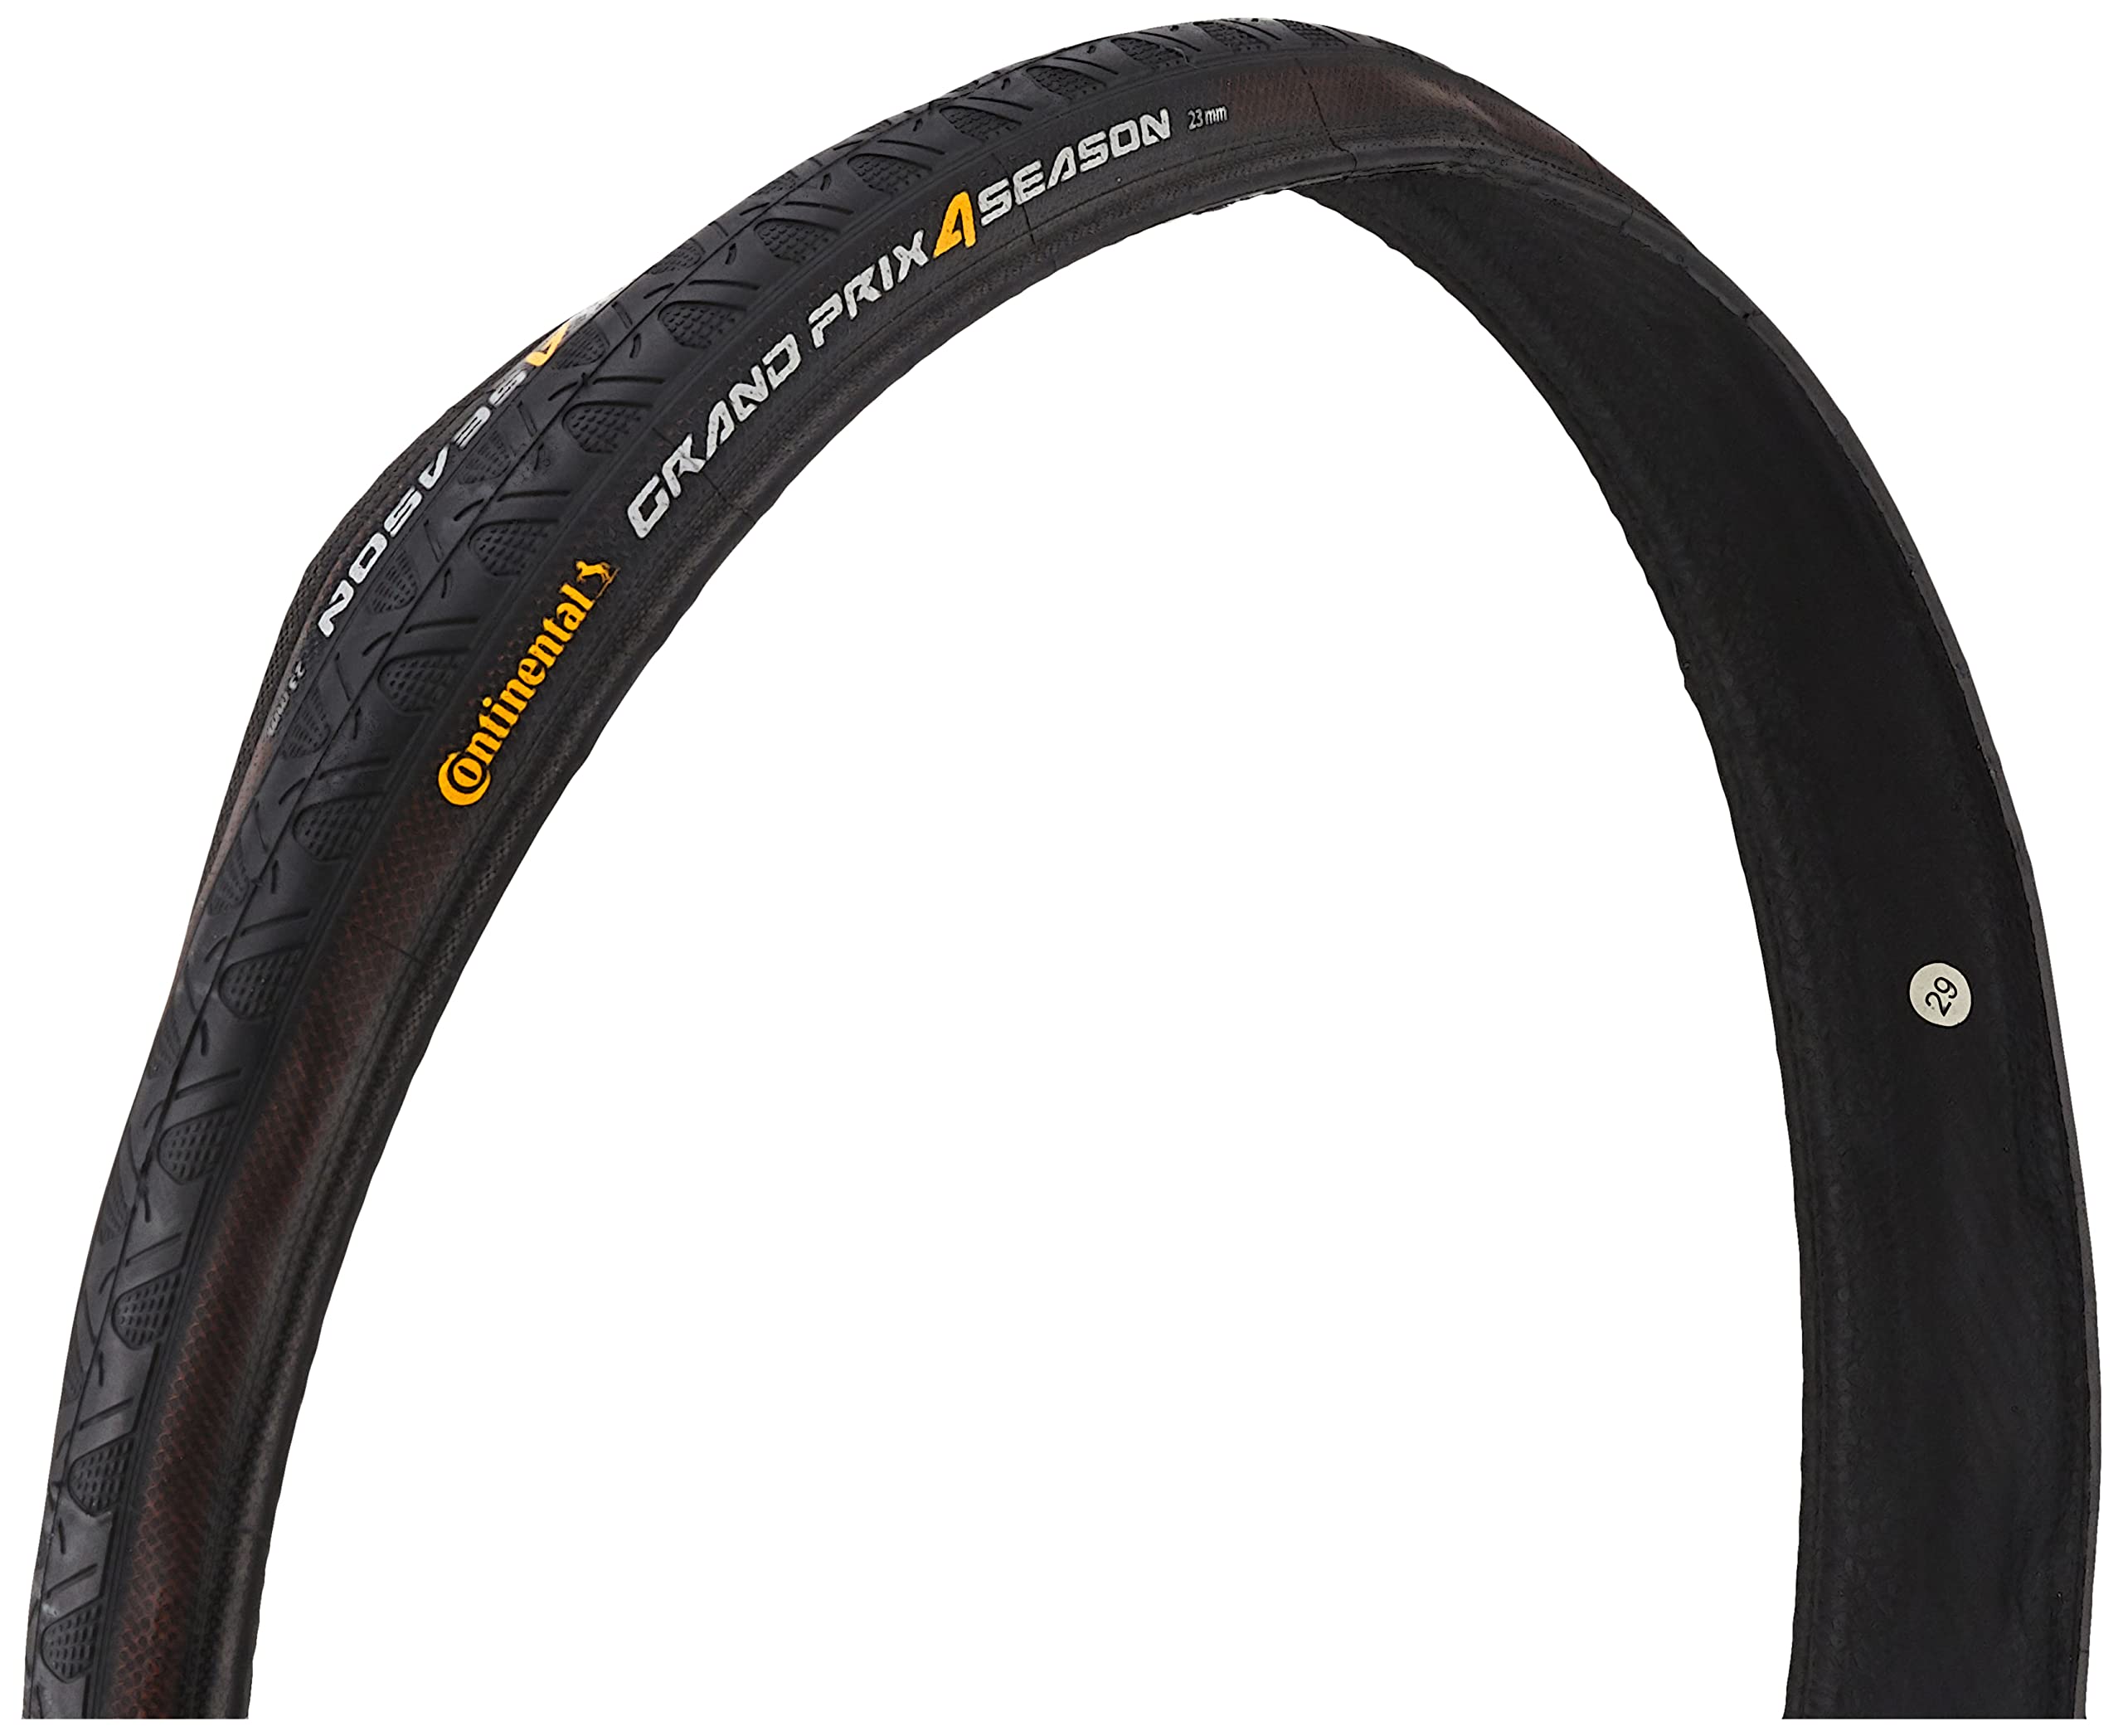 Looking to Buy New Kylin Bike Tires Online. Learn All You Need